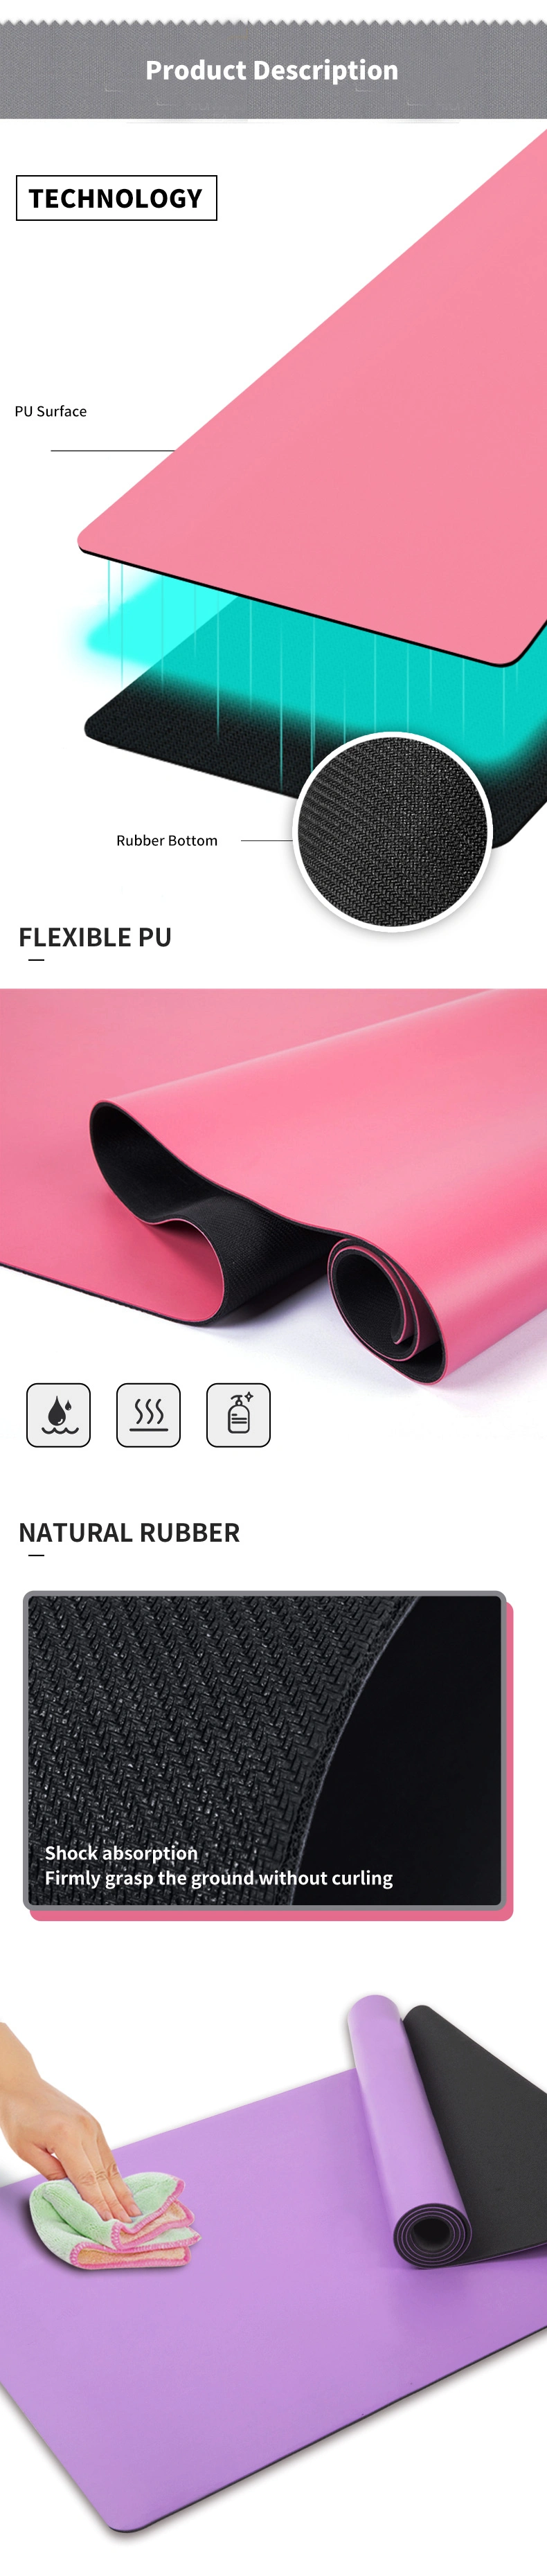 Wholesale High Quality Eco Friendly Natural Tree Rubber Base Black Gold Stamp Print PU Alignment Yoga Mat